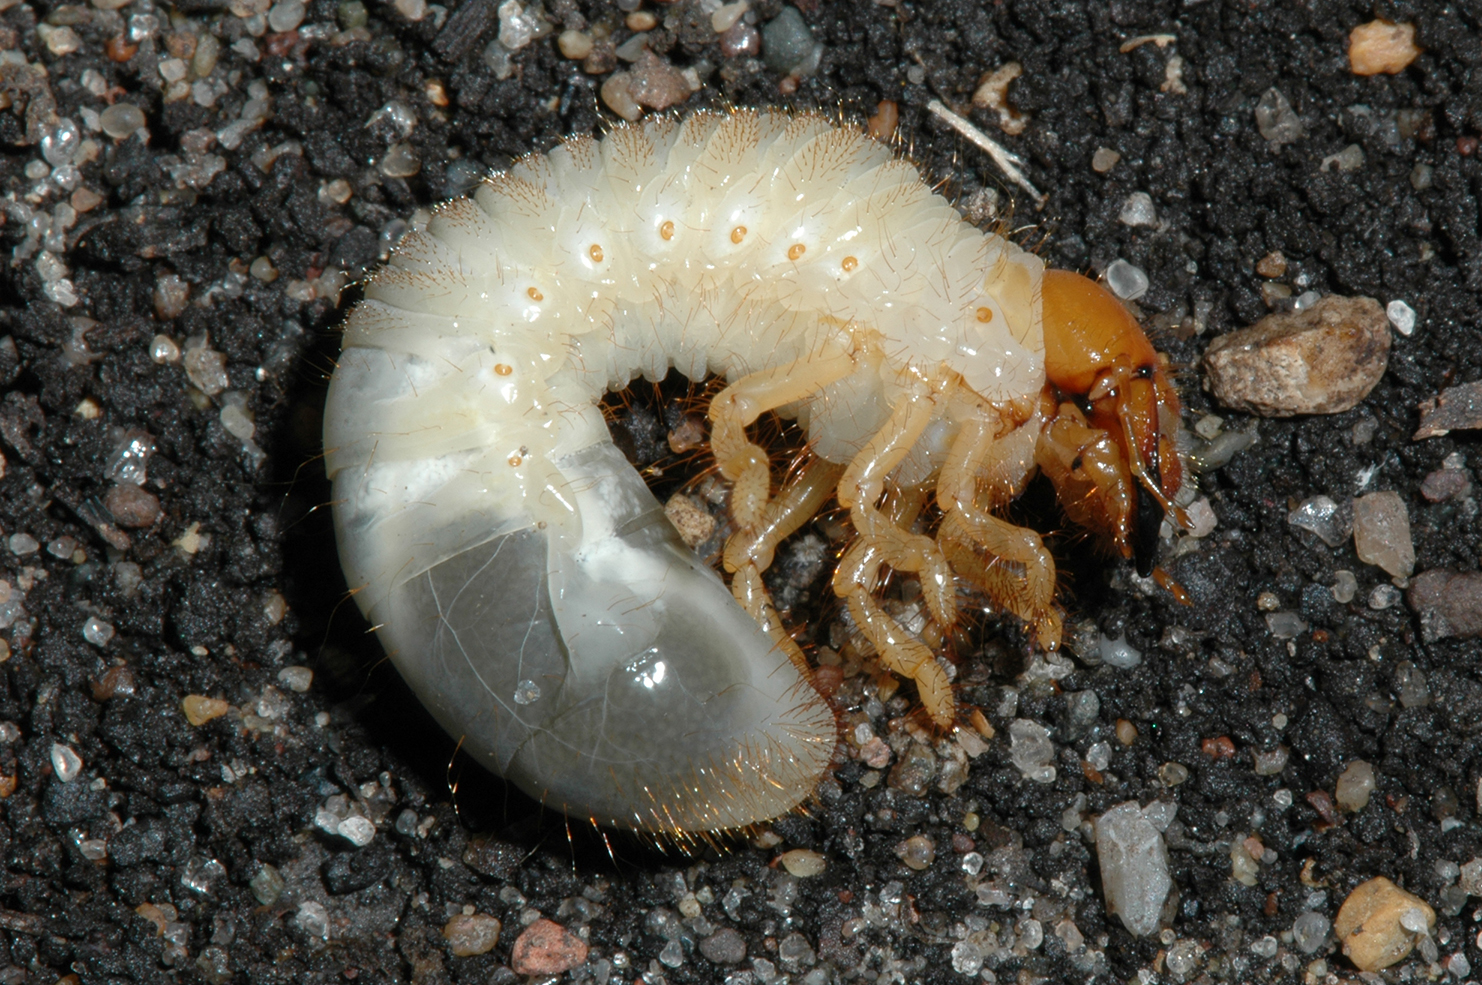 Small curved white insect with orange head and six legs